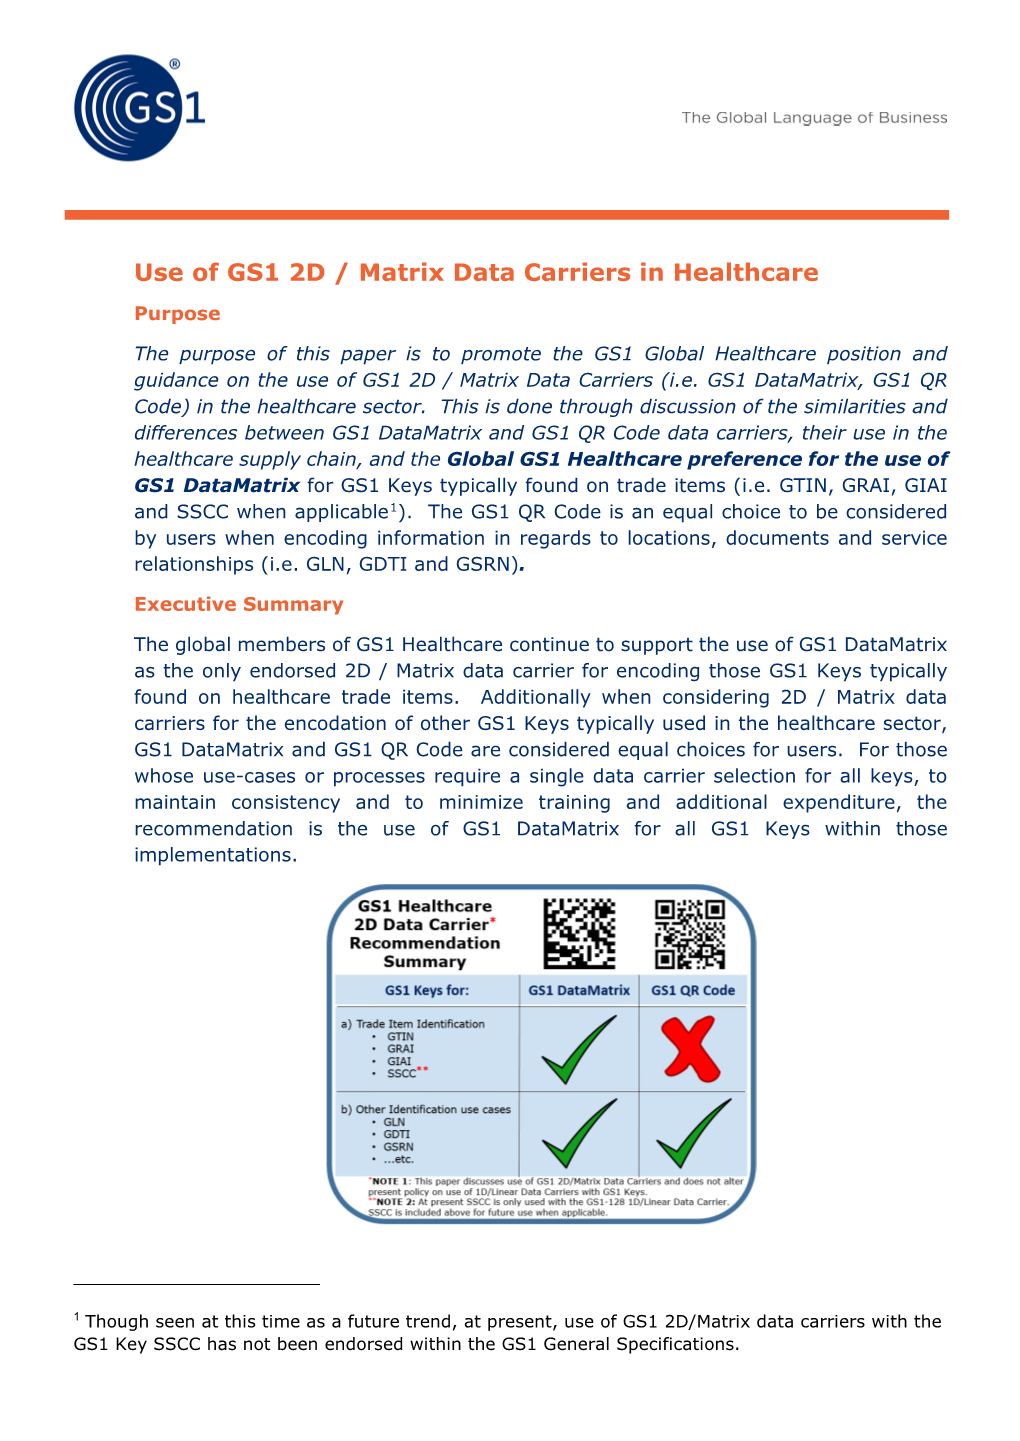 Use of GS1 2D/Matrix Data Carriers in Healthcare